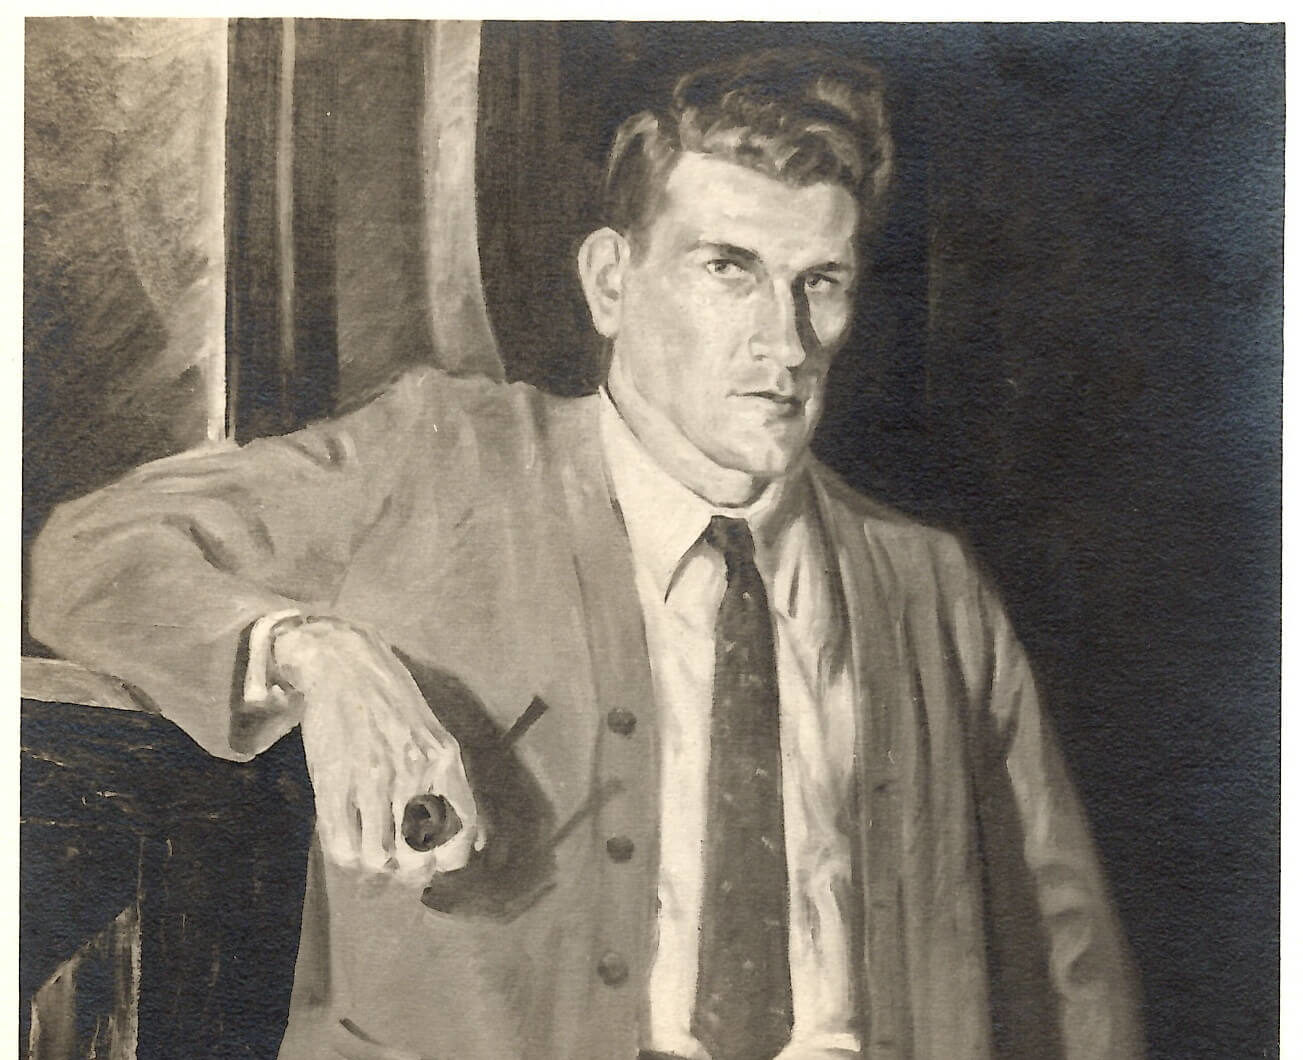 Portrait of a man wearing a jacket and tie standing with one arm leaning on something behind him